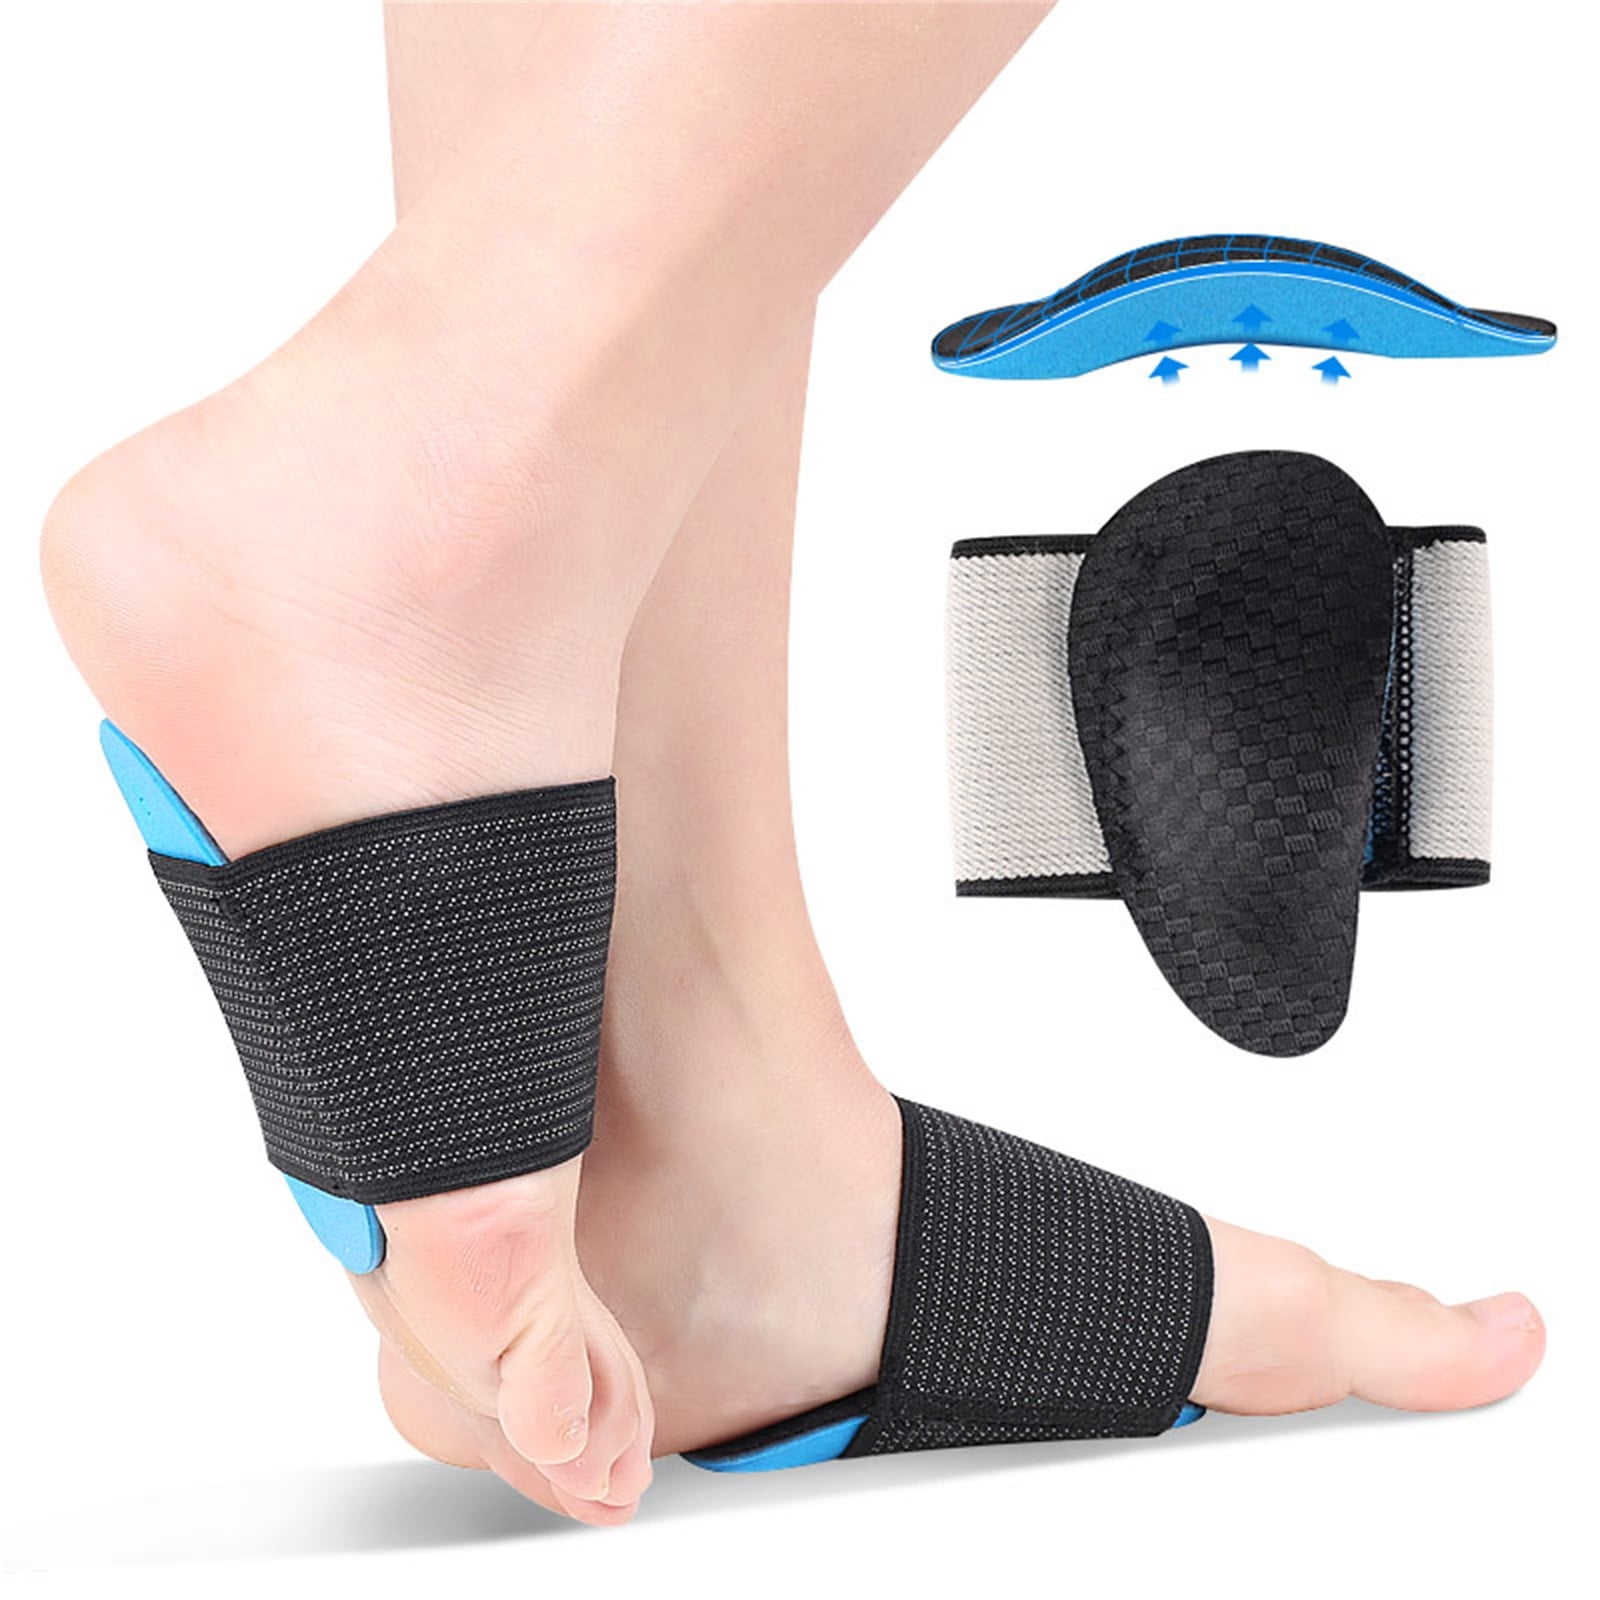 2Pcs Foot Heel Pain Relief Plantar Fasciitis Insole Pads Arch Support Feet Care 